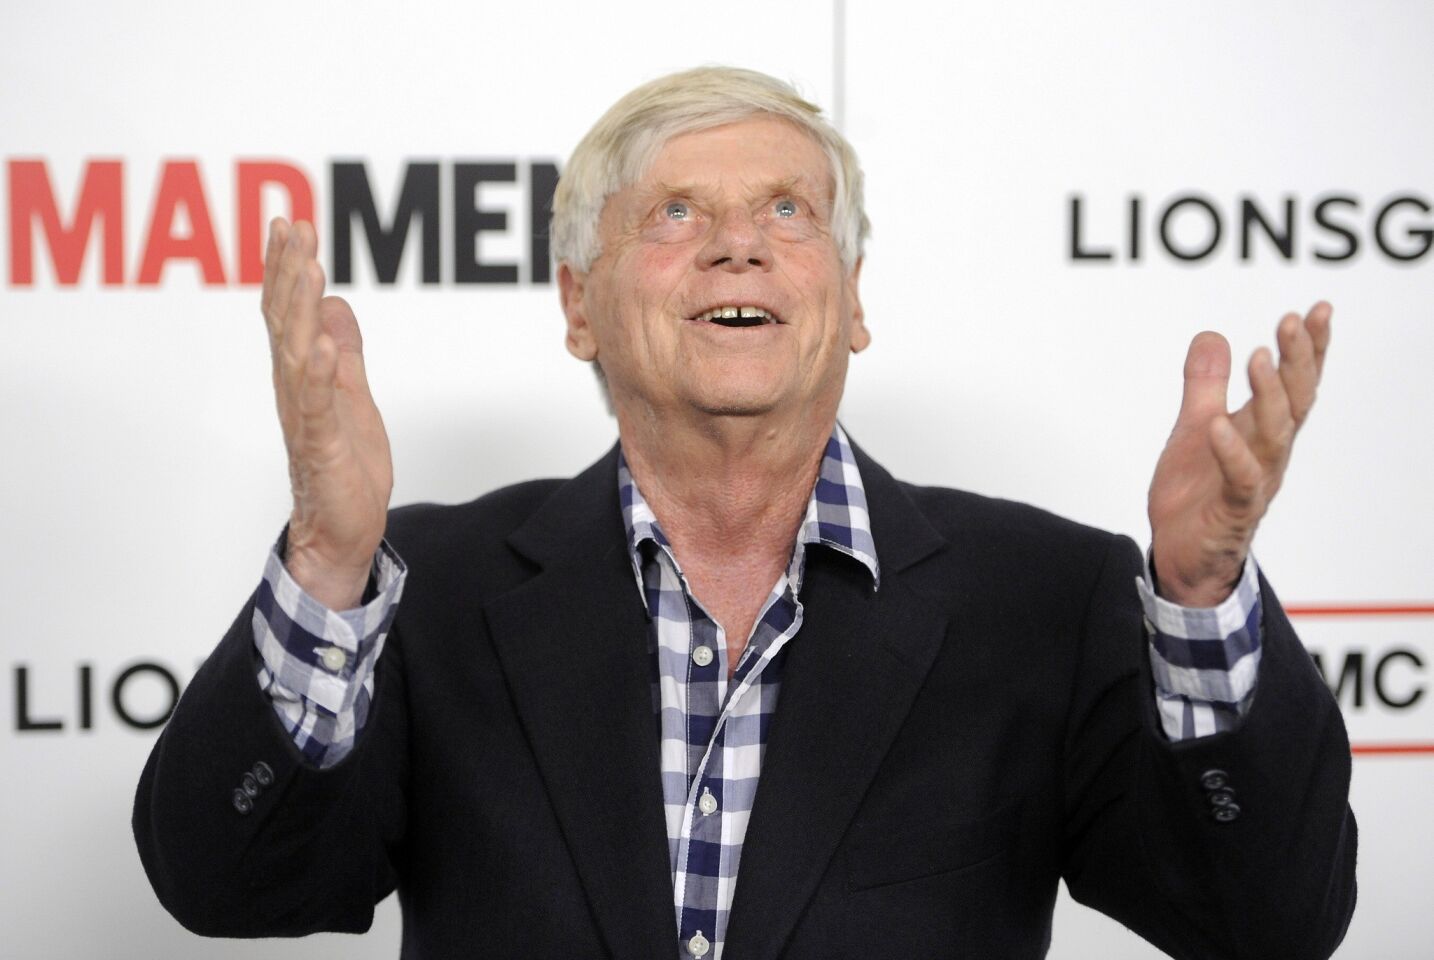 Robert Morse, photographed her with his shirt unbuttoned, plays the always bow-tied Bertram "Burt" Cooper, one of the founders of the ad company Sterling Cooper.